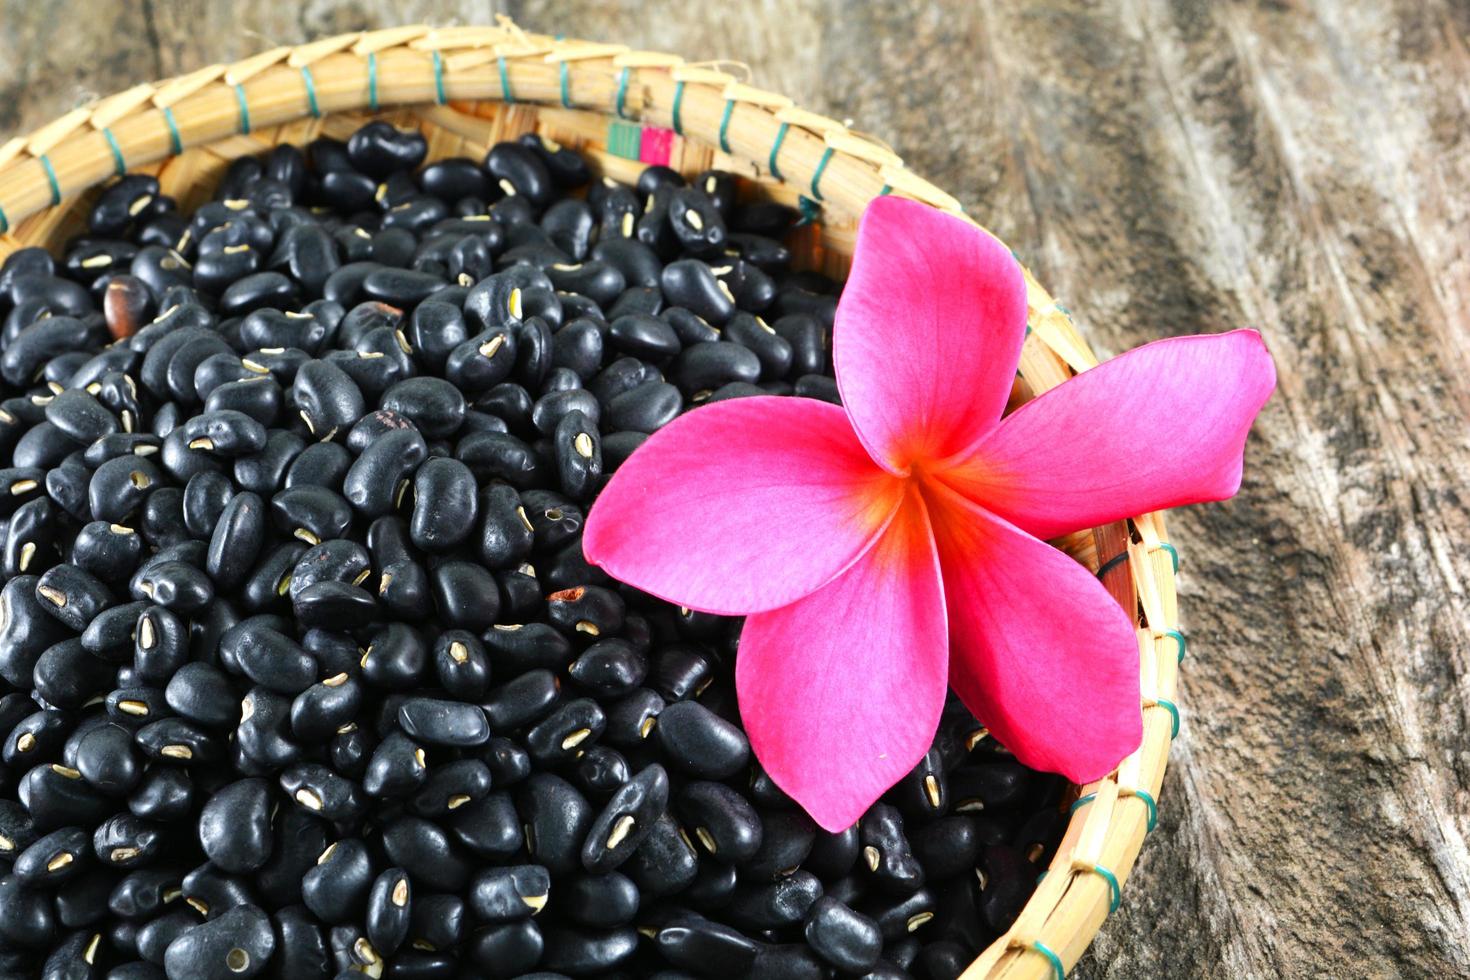 Black bean grain seeds on basket with pink flower on wooden background photo